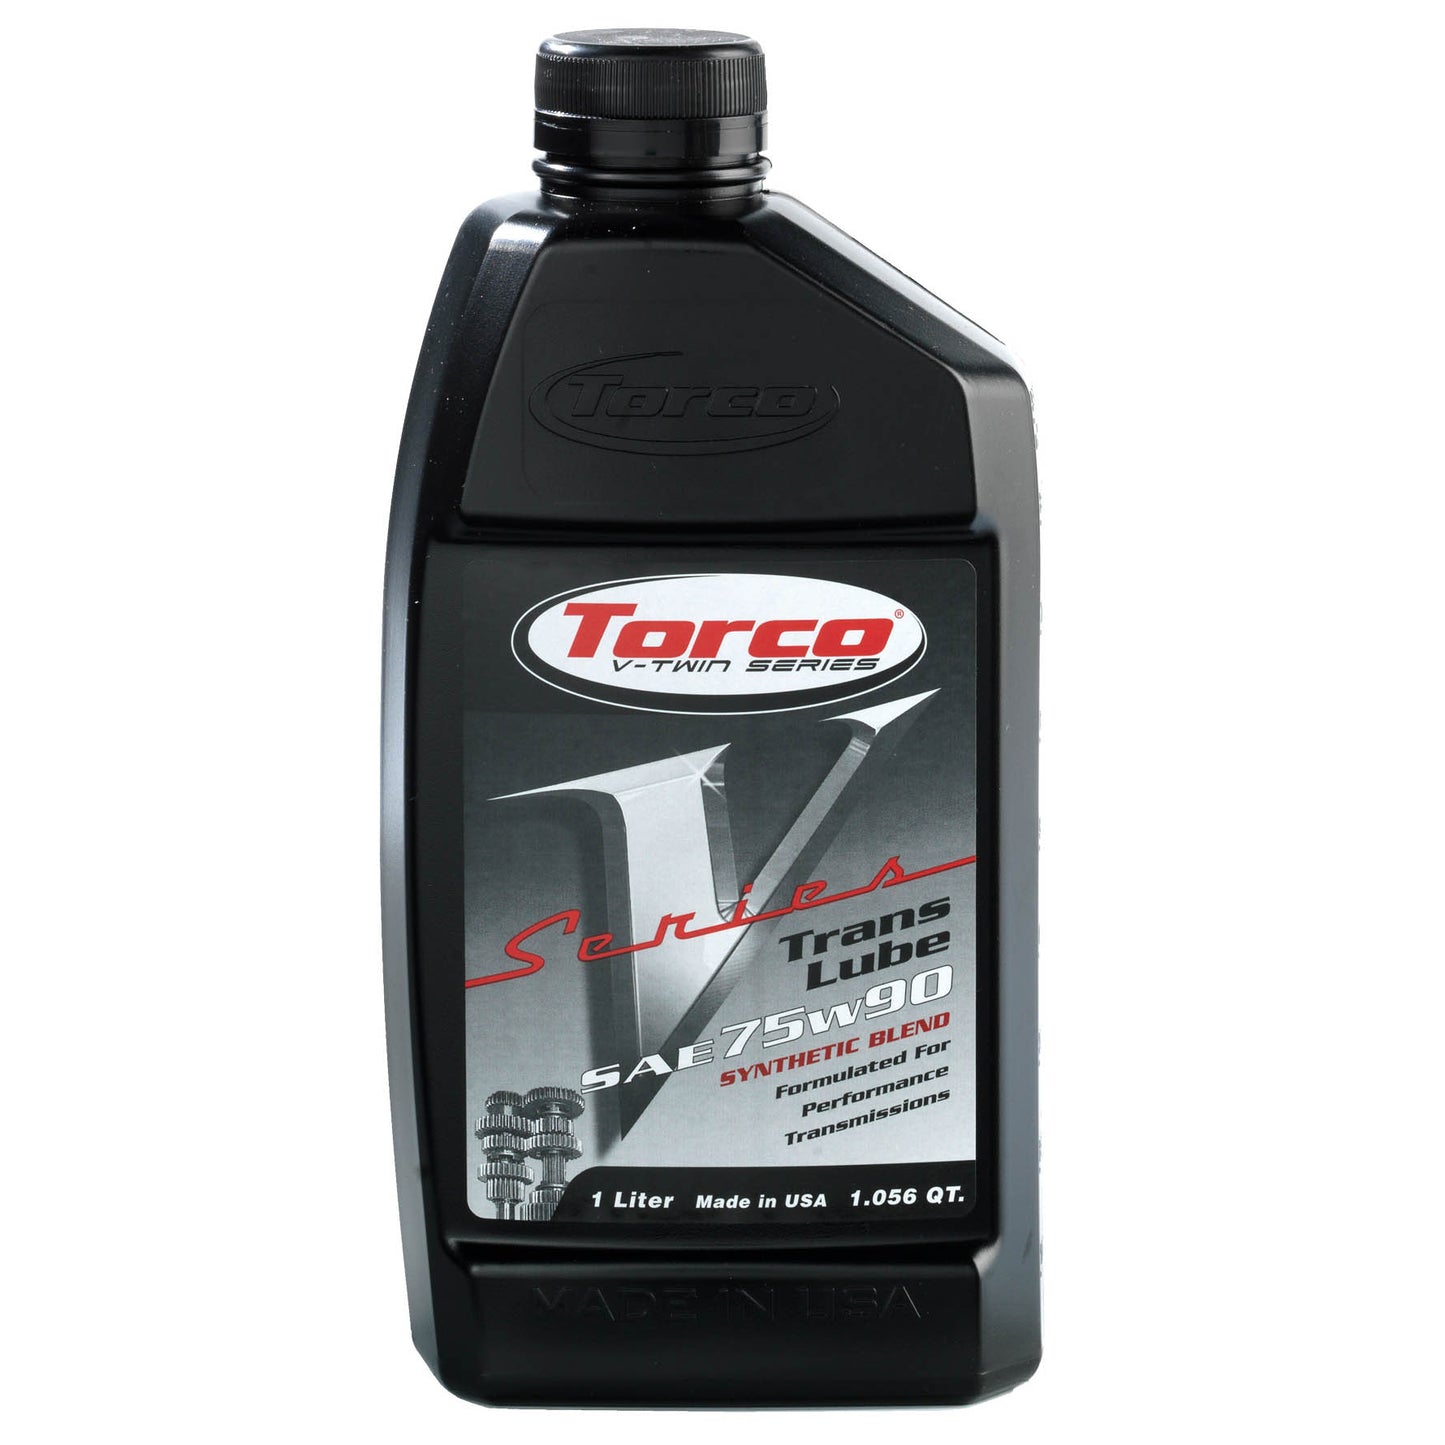 Torco V-twin transmission lube 75w90